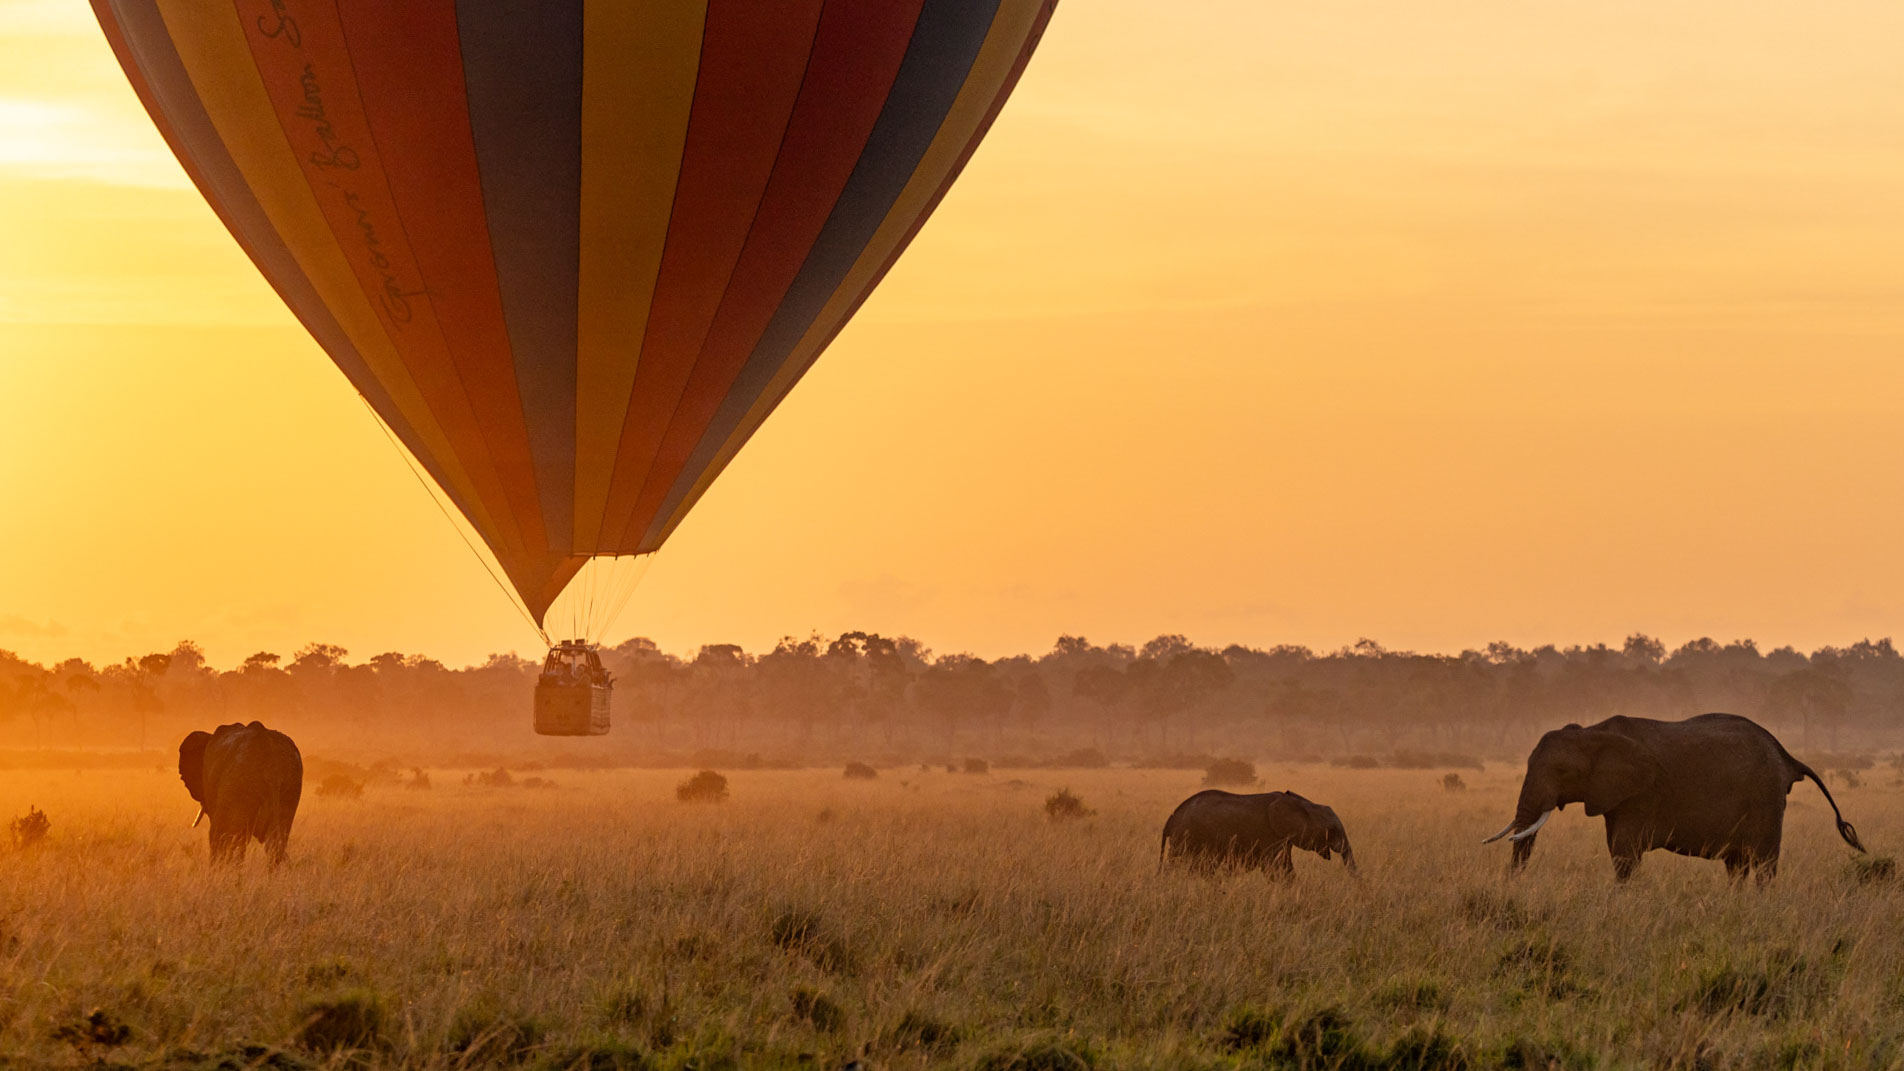 Above: A peaceful moment in the Mara